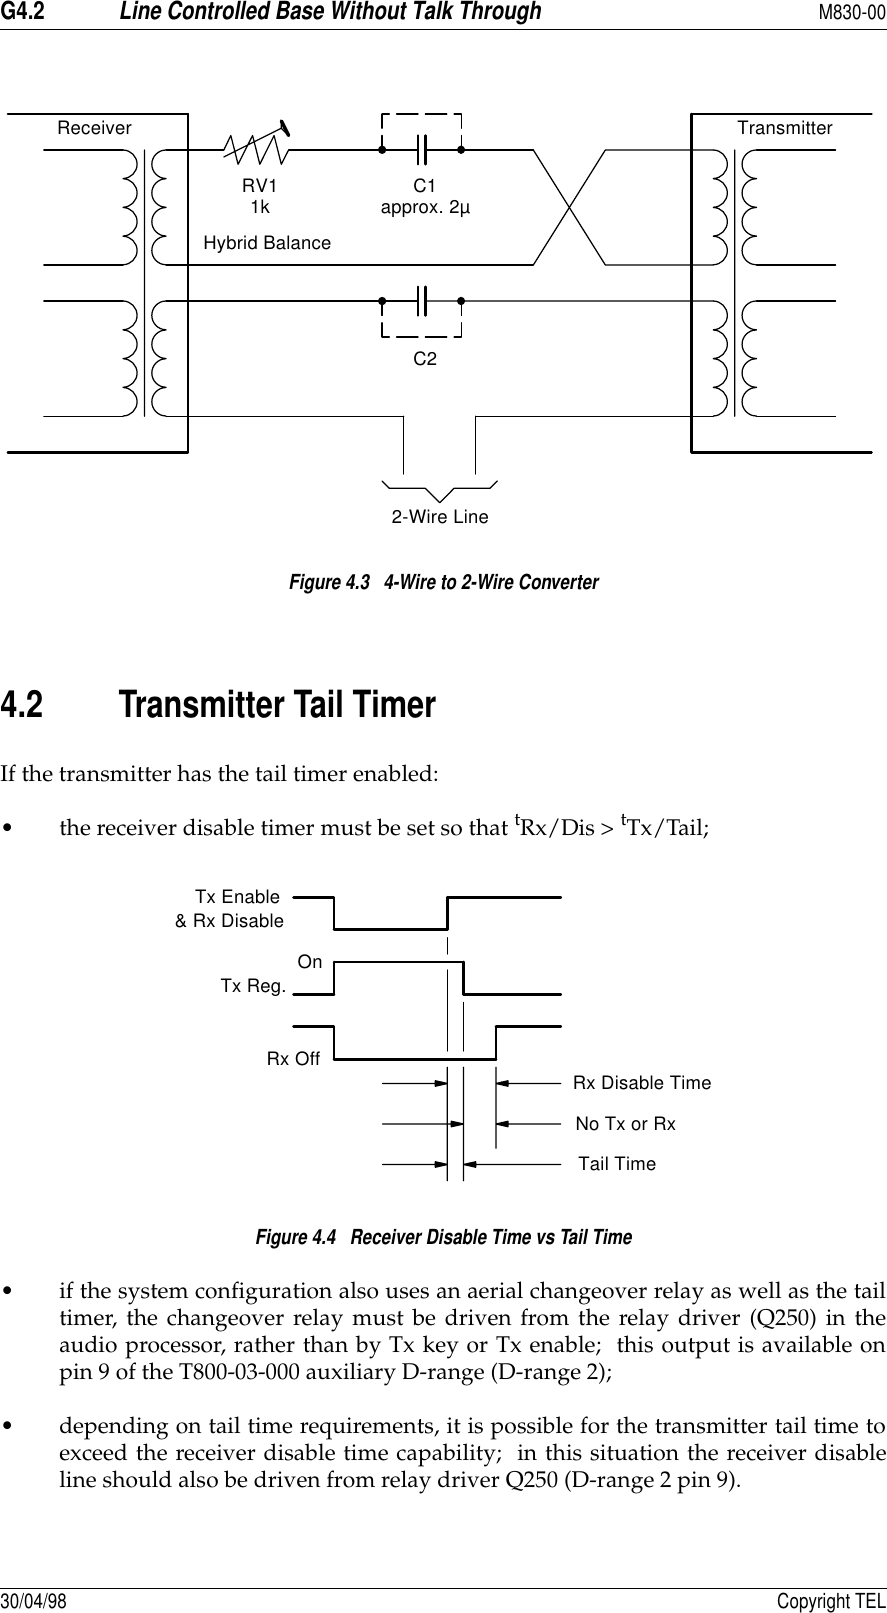 G4.2Line Controlled Base Without Talk ThroughM830-0030/04/98 Copyright TELFigure 4.3   4-Wire to 2-Wire Converter4.2 Transmitter Tail TimerIf the transmitter has the tail timer enabled:• the receiver disable timer must be set so that tRx/Dis &gt; tTx/Tail;Figure 4.4   Receiver Disable Time vs Tail Time• if the system configuration also uses an aerial changeover relay as well as the tailtimer, the changeover relay must be driven from the relay driver (Q250) in theaudio processor, rather than by Tx key or Tx enable;  this output is available onpin 9 of the T800-03-000 auxiliary D-range (D-range 2);• depending on tail time requirements, it is possible for the transmitter tail time toexceed the receiver disable time capability;  in this situation the receiver disableline should also be driven from relay driver Q250 (D-range 2 pin 9).2-Wire LineC1C2TransmitterReceiverRV1 approx. 2µHybrid Balance1kRx Disable TimeNo Tx or RxTail TimeOnTx Reg.Rx OffTx Enable&amp; Rx Disable